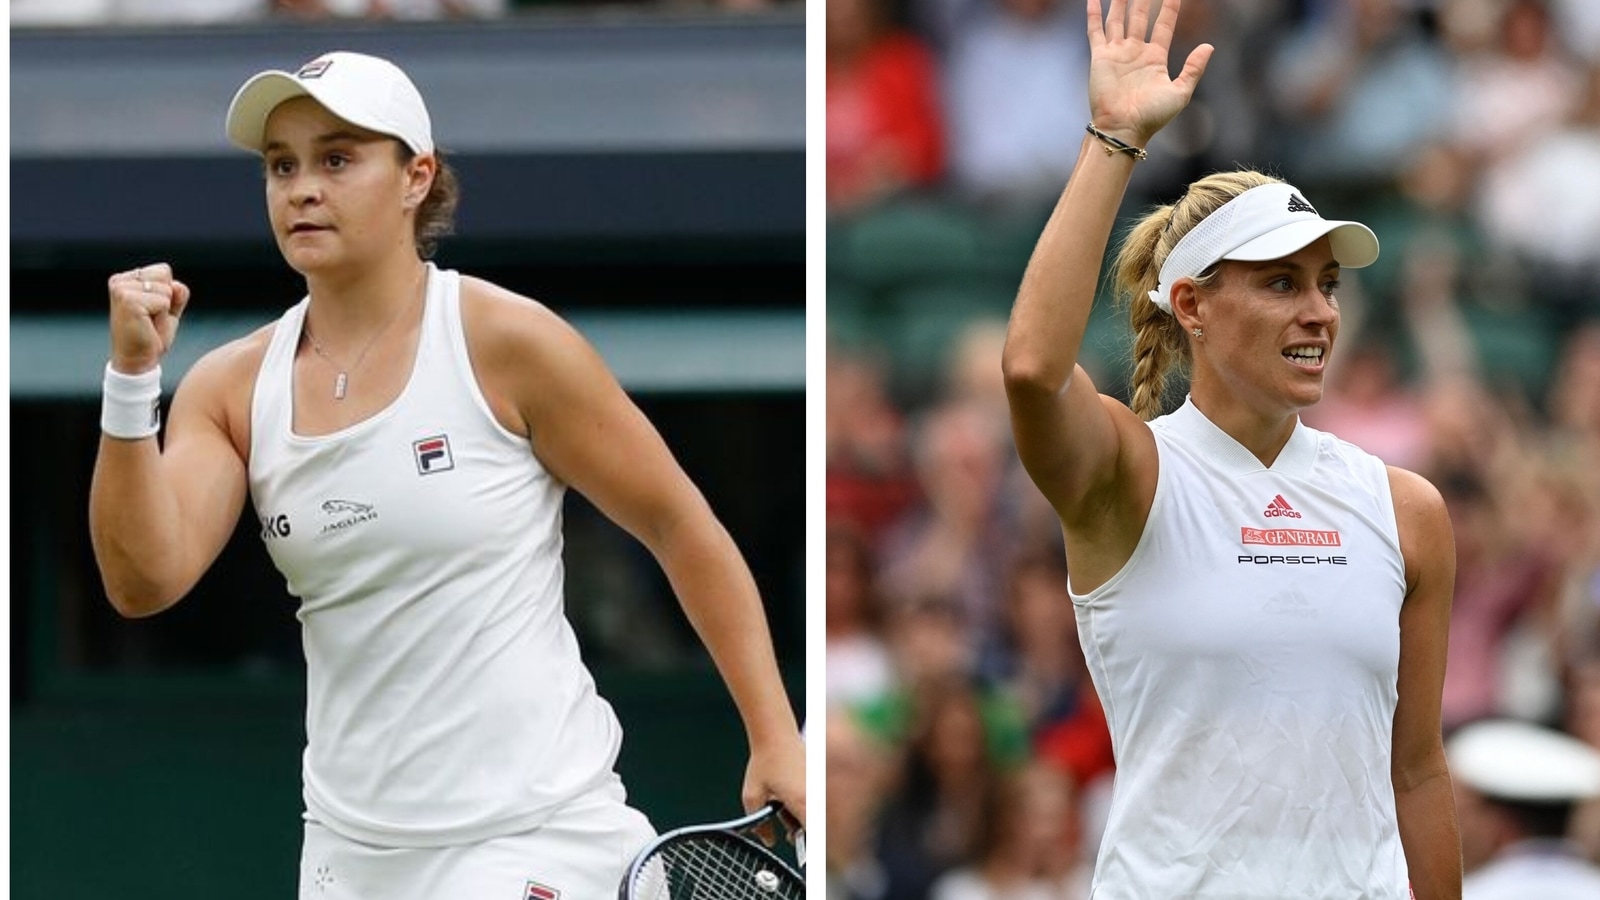 Wimbledon 2021 live streaming, Ash Barty vs Angelique Kerber, womens semifinal When and where to watch online and on TV Tennis News